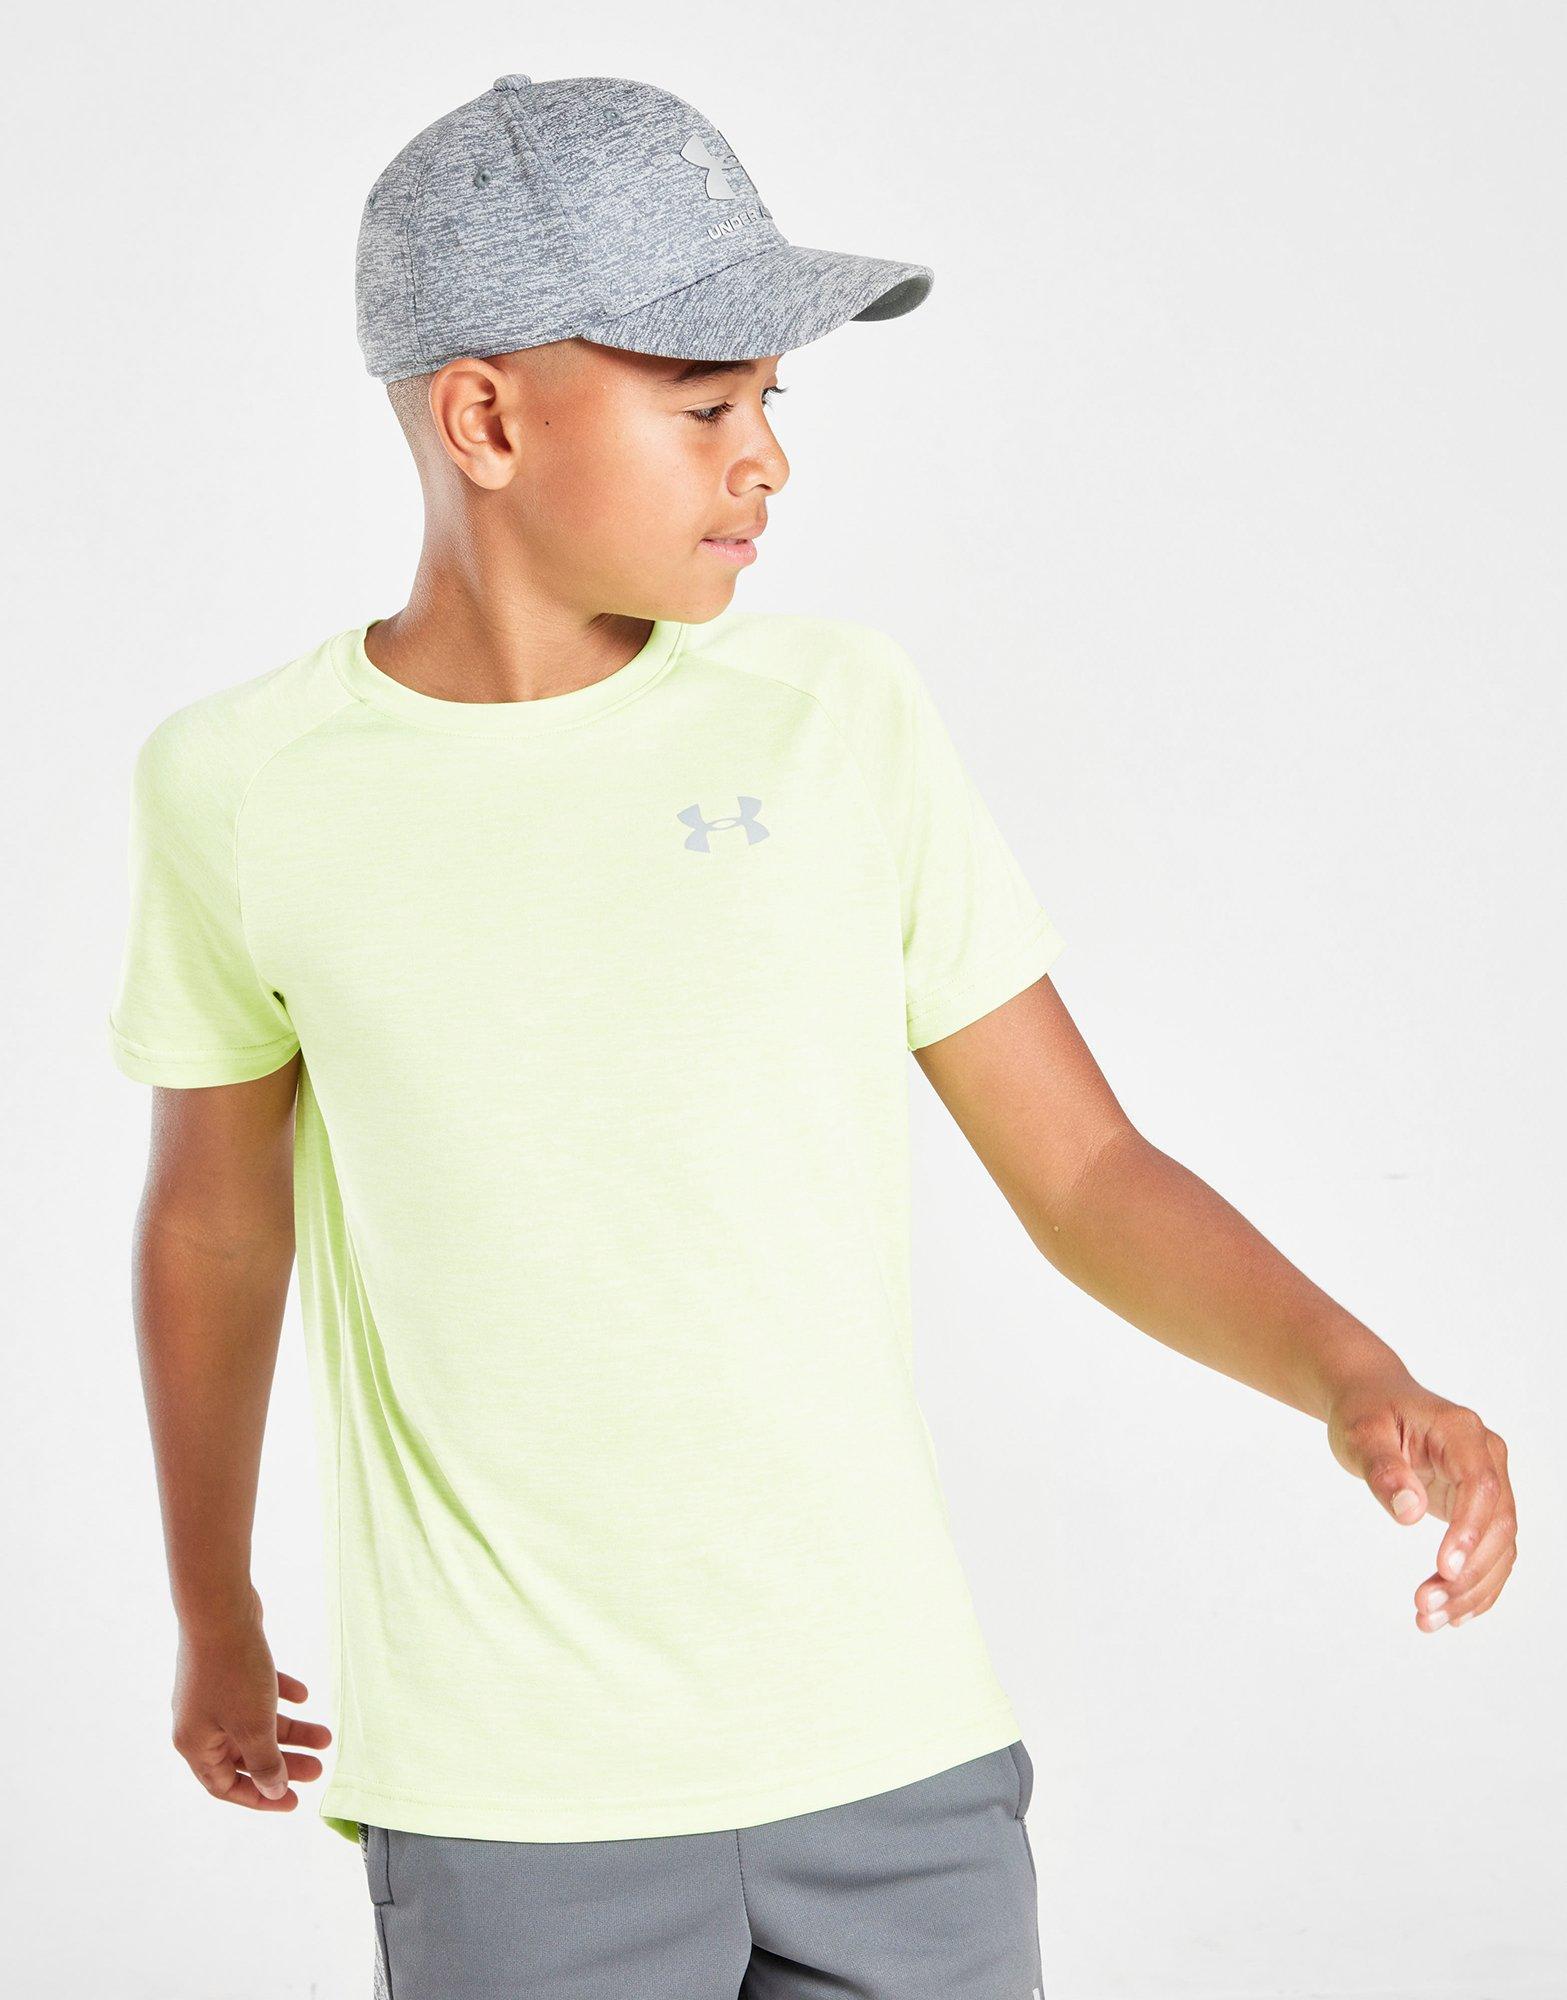 under armour yellow t shirt